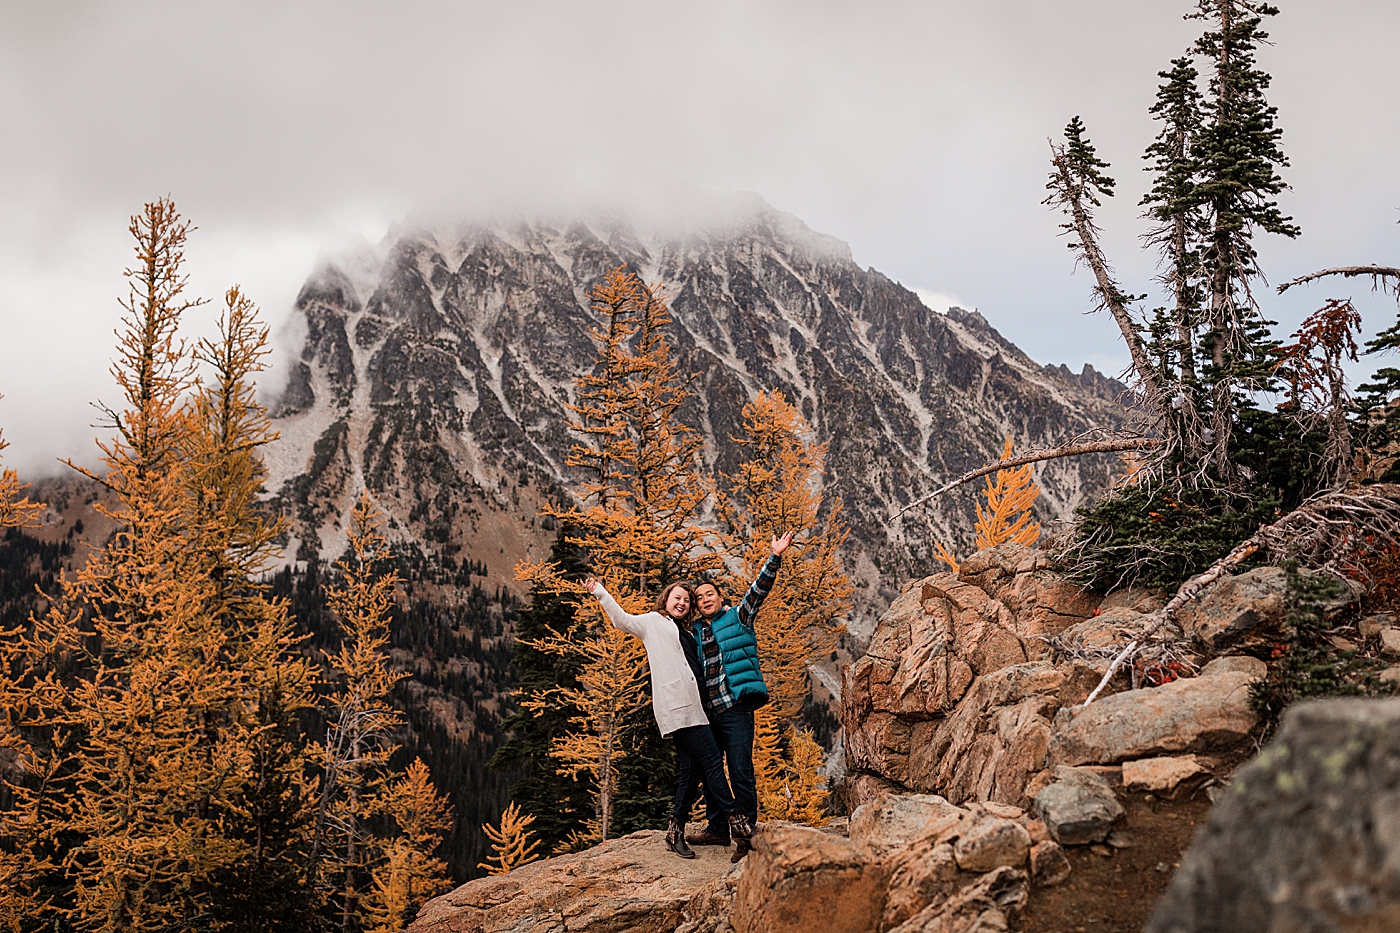 Adventure engagement session in the PNW during fall. Photo by Megan Montalvo Photography.